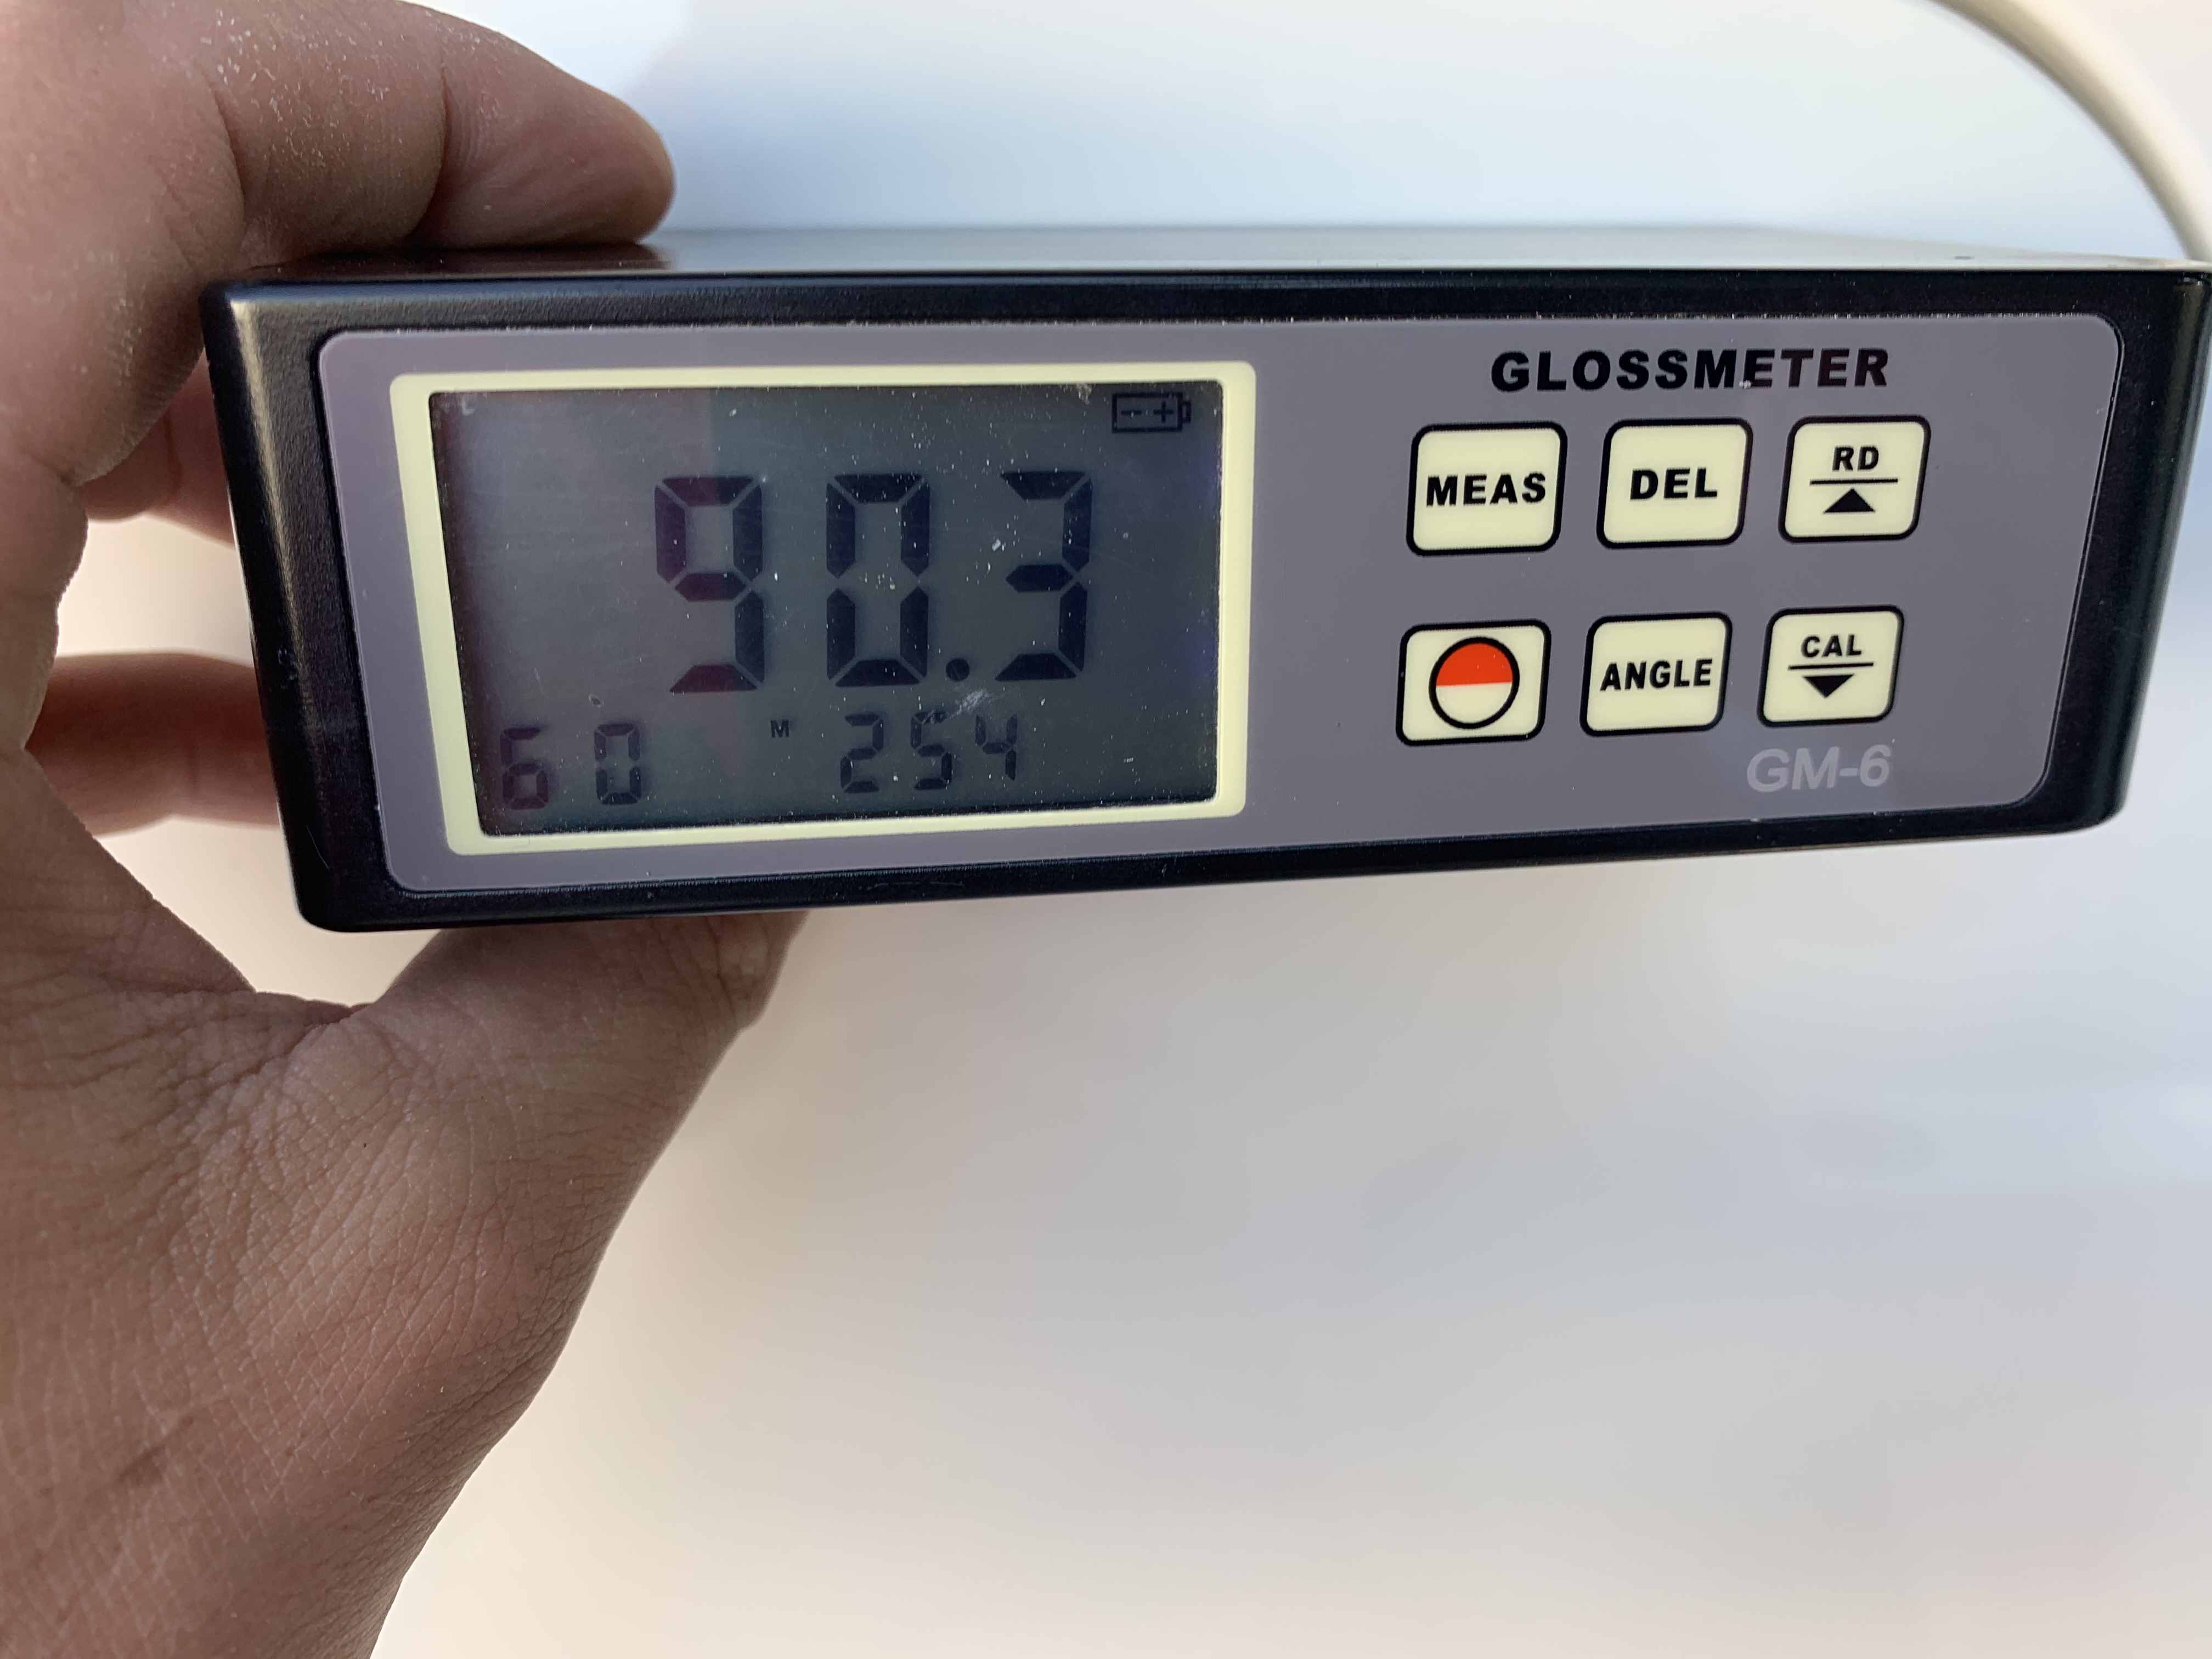 90.3 gloss meter reading after ceramic boat coating